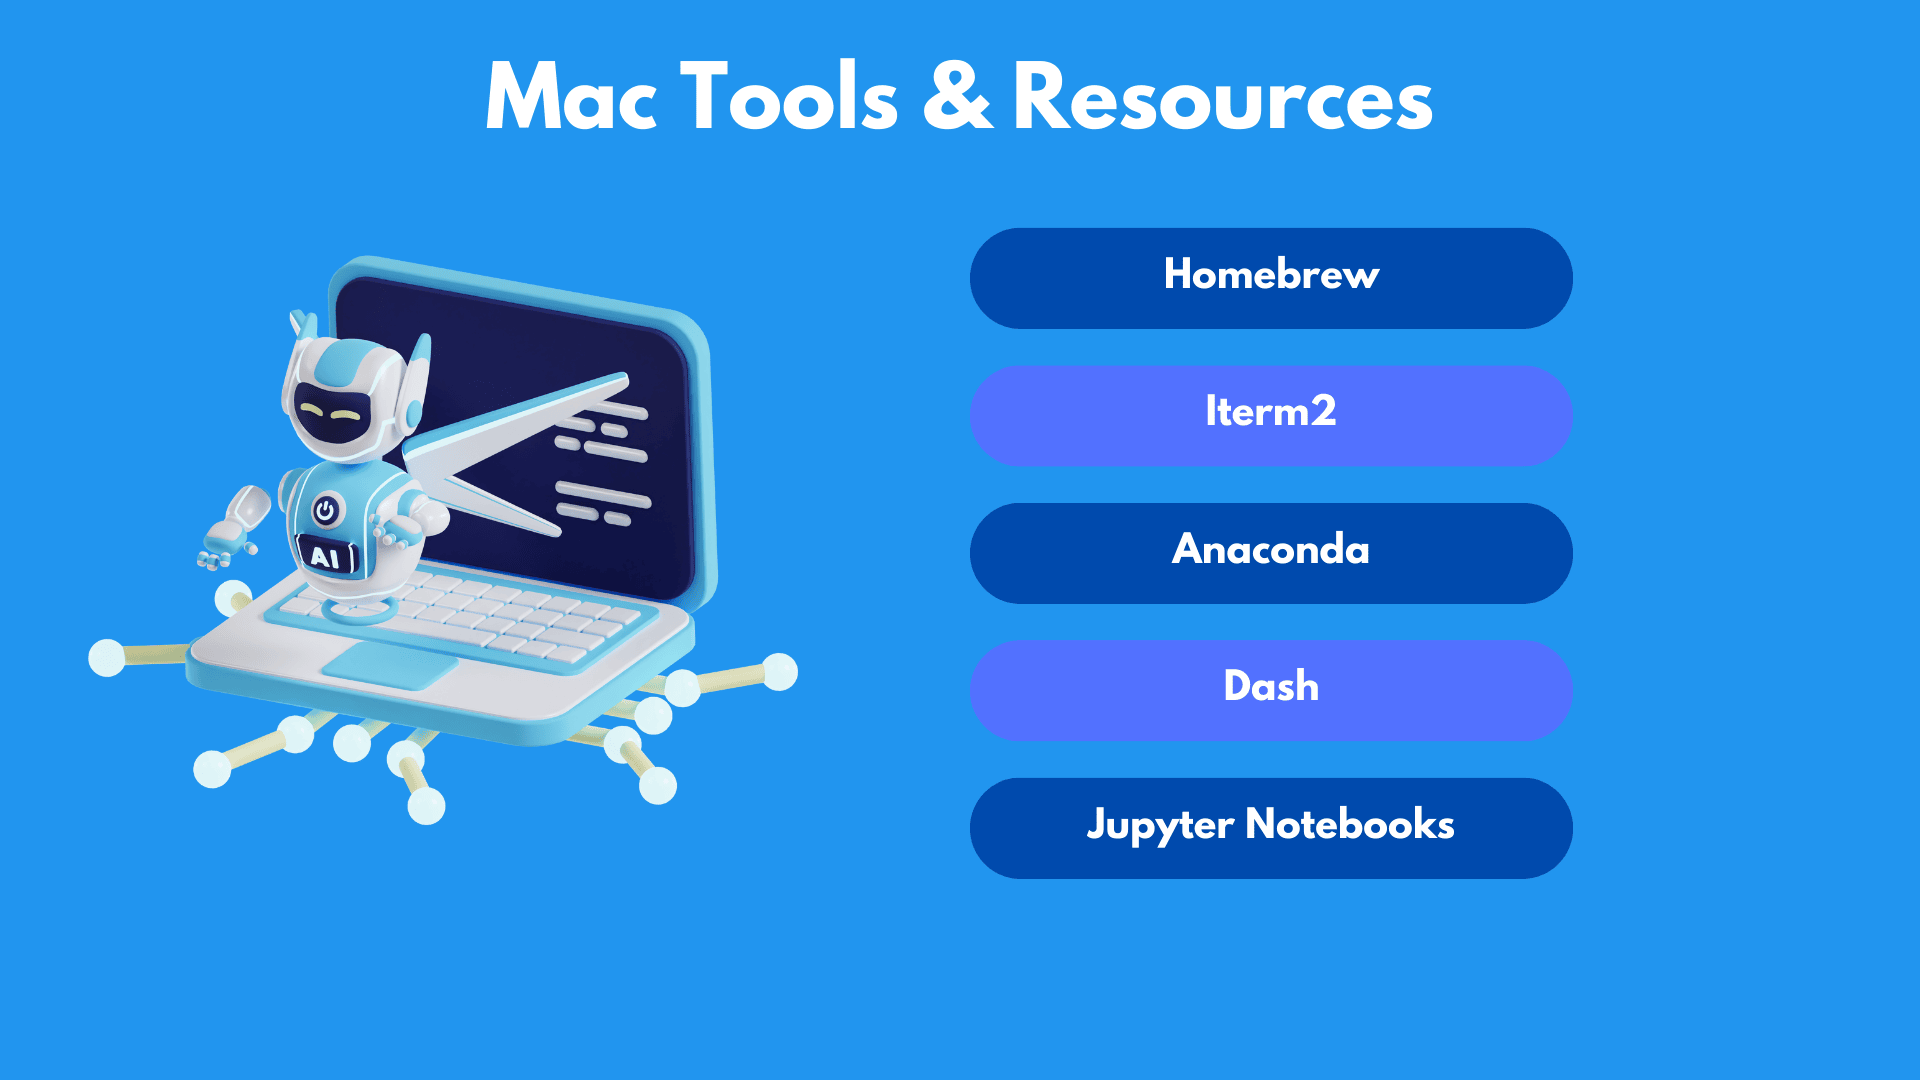 Additional Mac Tools and Resources for Data Scientists